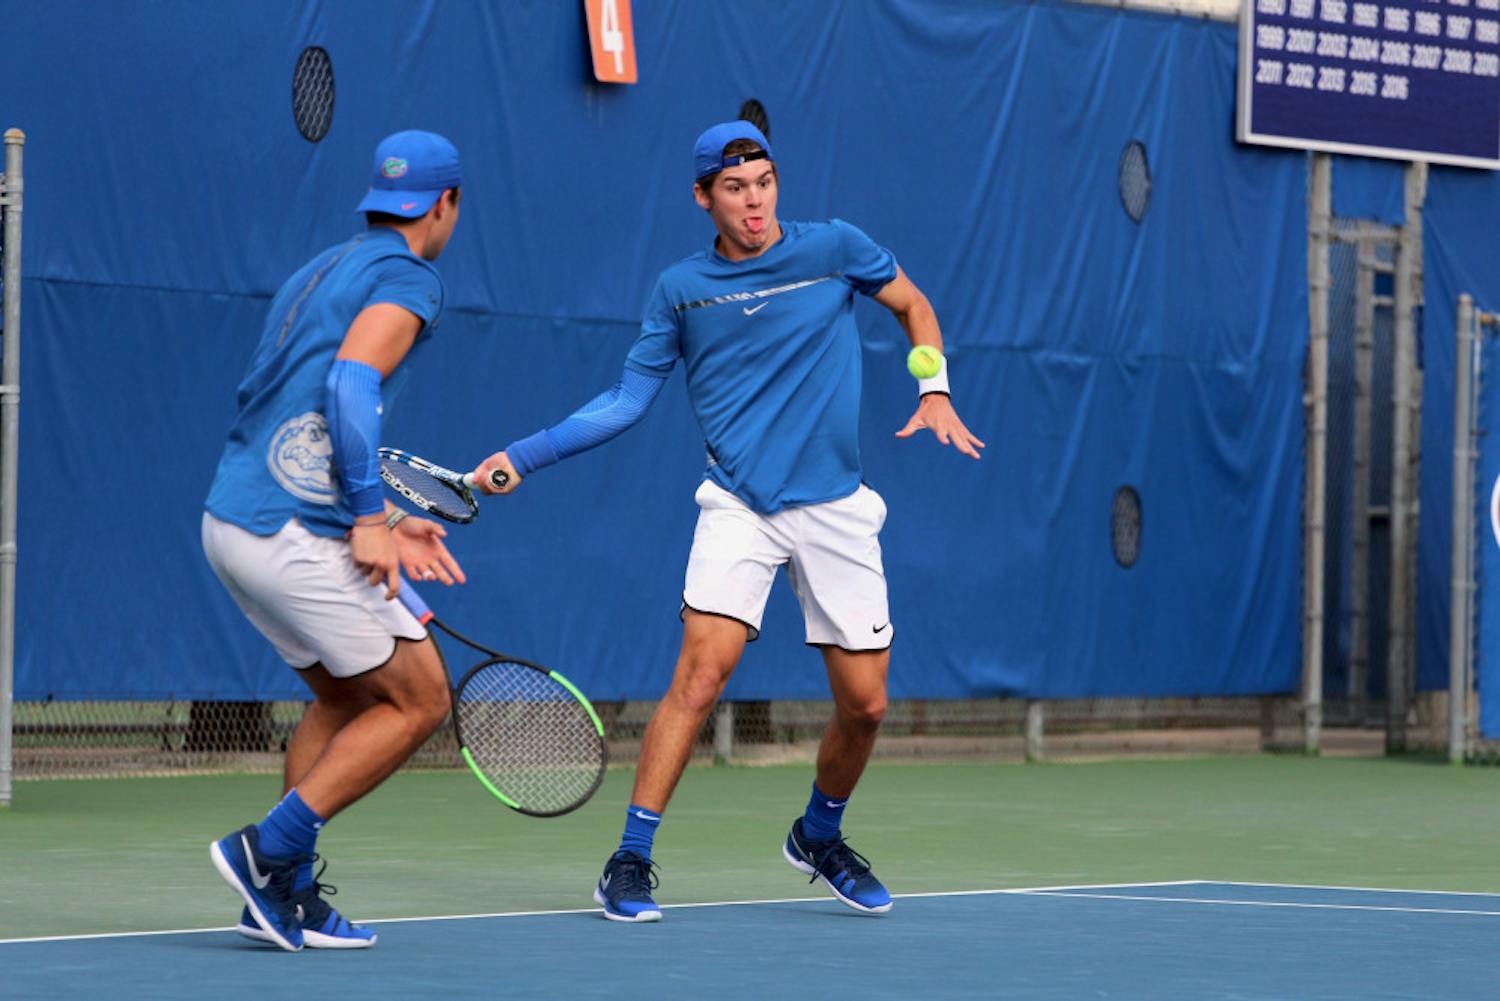 Florida’s No. 1 doubles pair — Duarte Vale (left) and McClain Kessler (right) — helped lead UF to a 4-2 win over No. 13 Michigan on Friday.